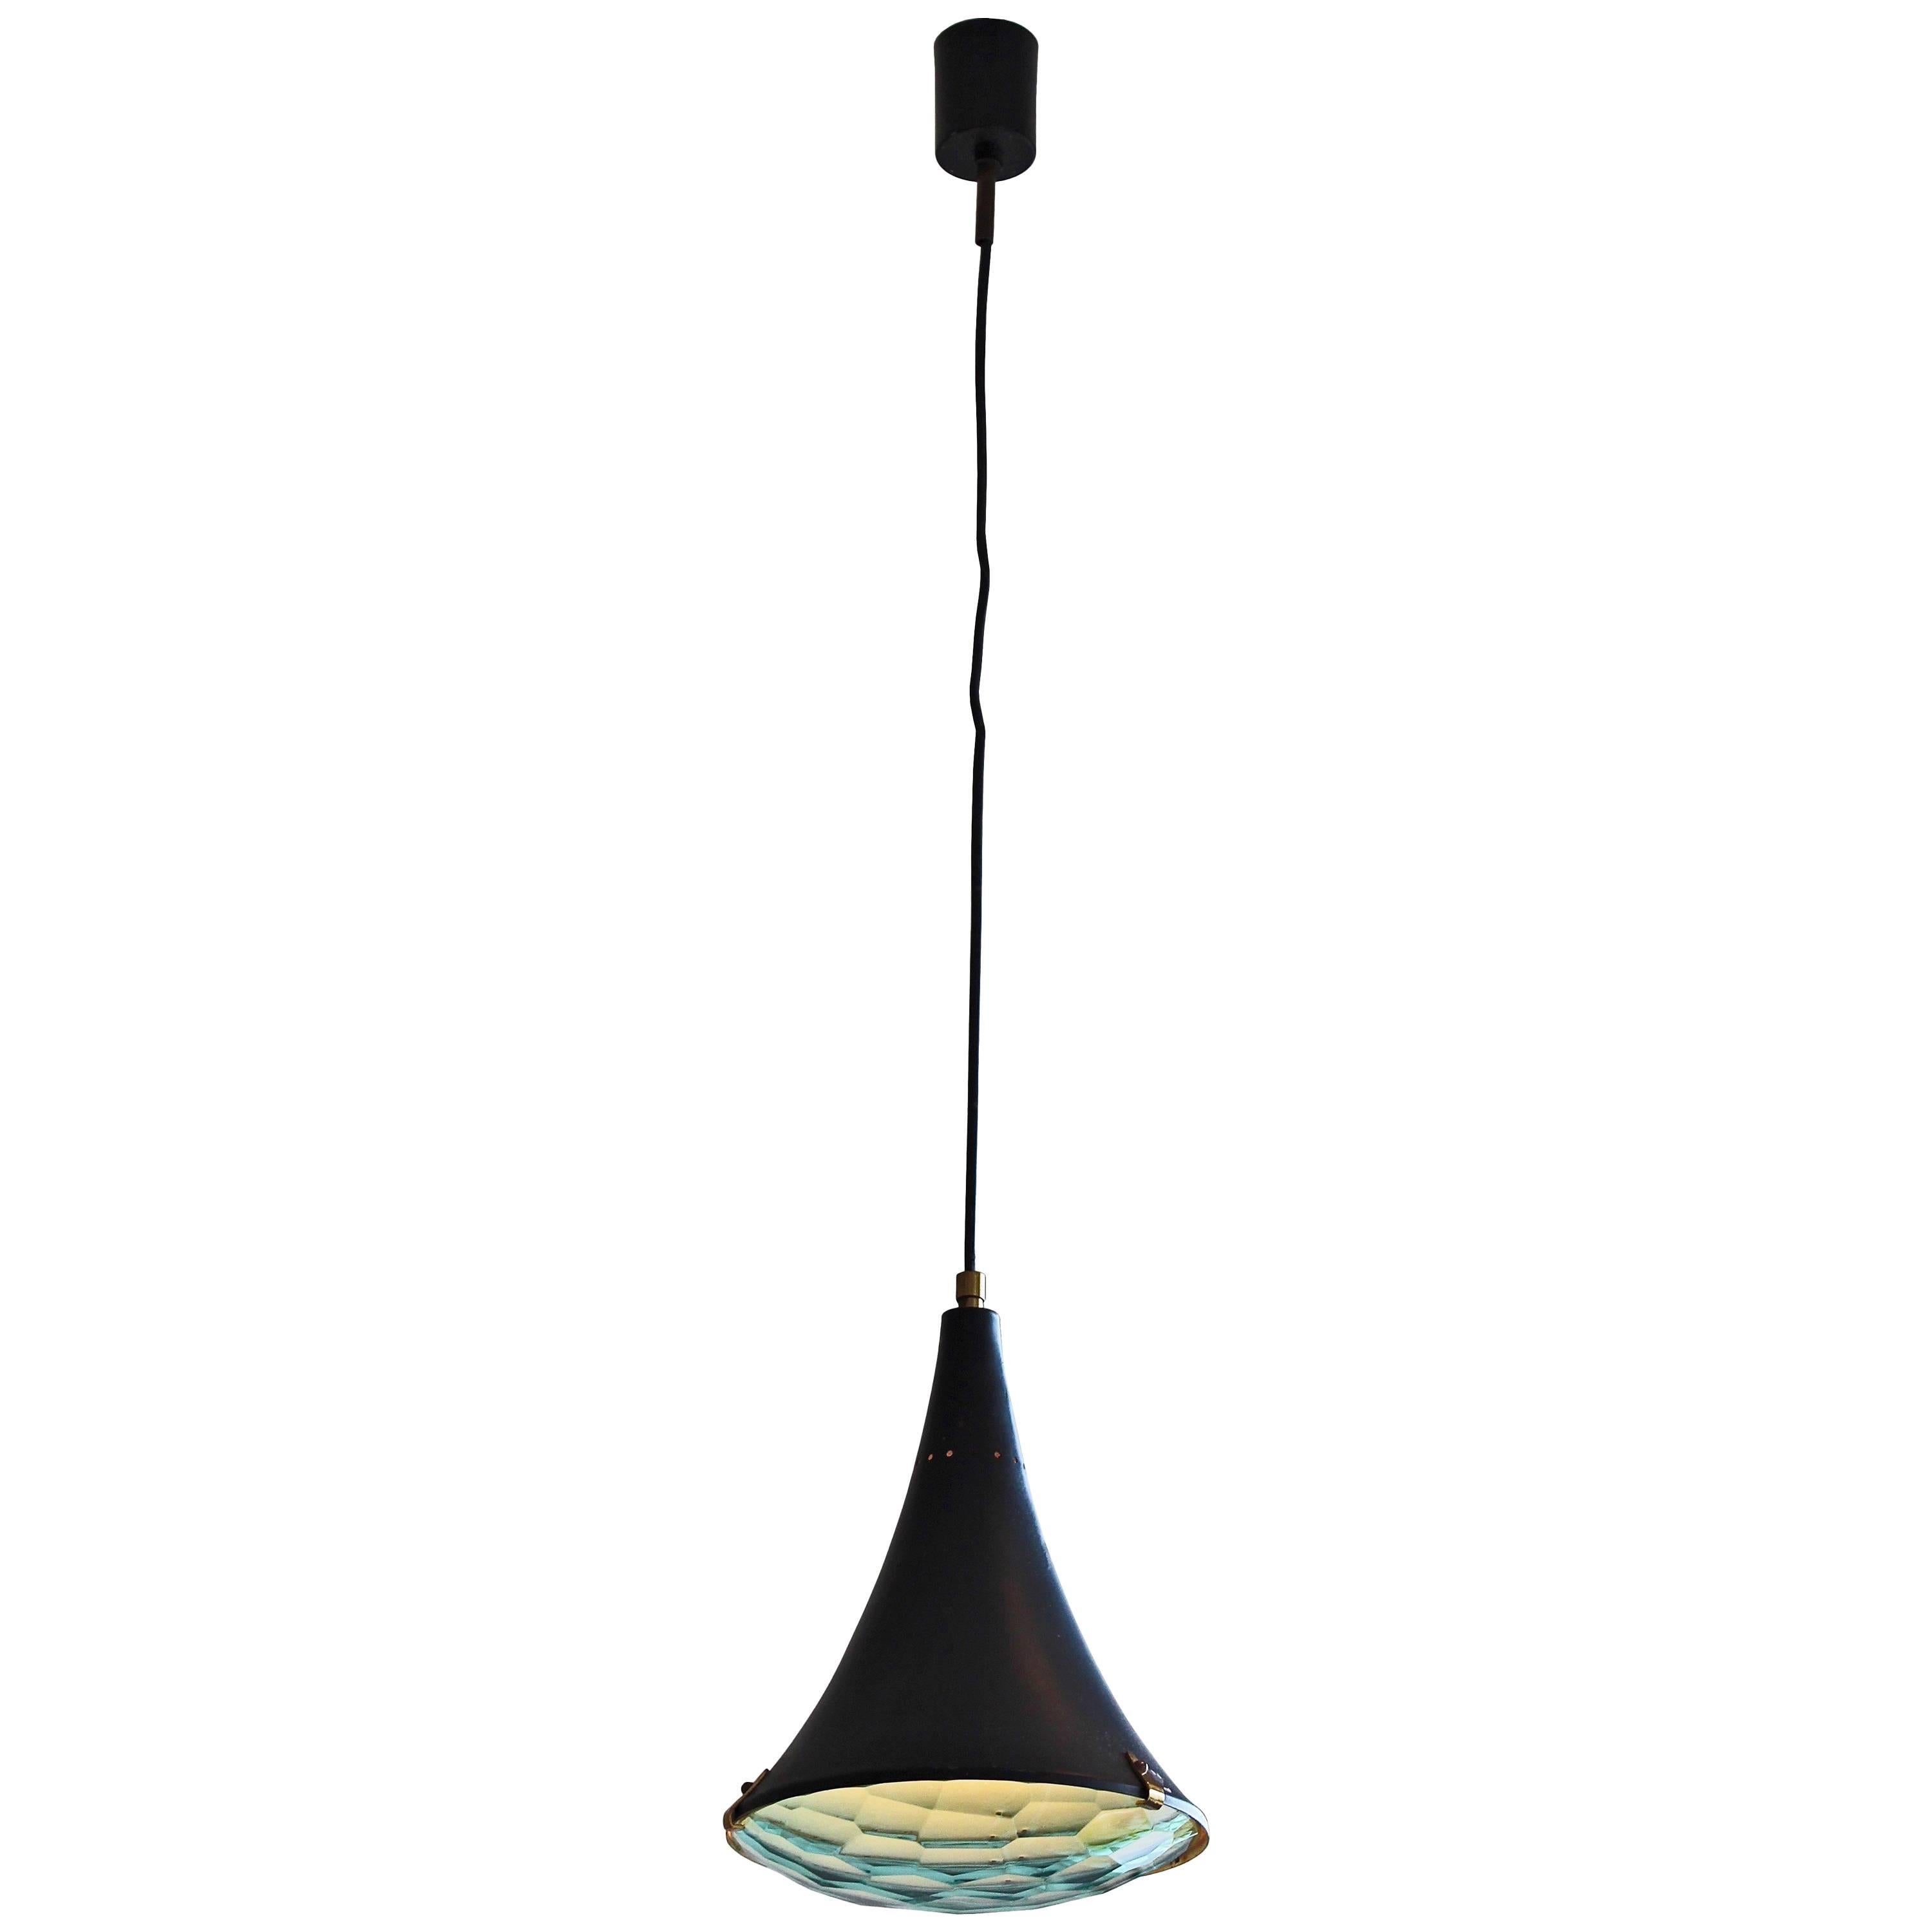 Elegant and minimal Stilnovo pendant with faceted glass, black lacquer shade with brass details

Similar in design to Max Ingrand for Fontana Arte pendant.

Drop from ceiling to suit.